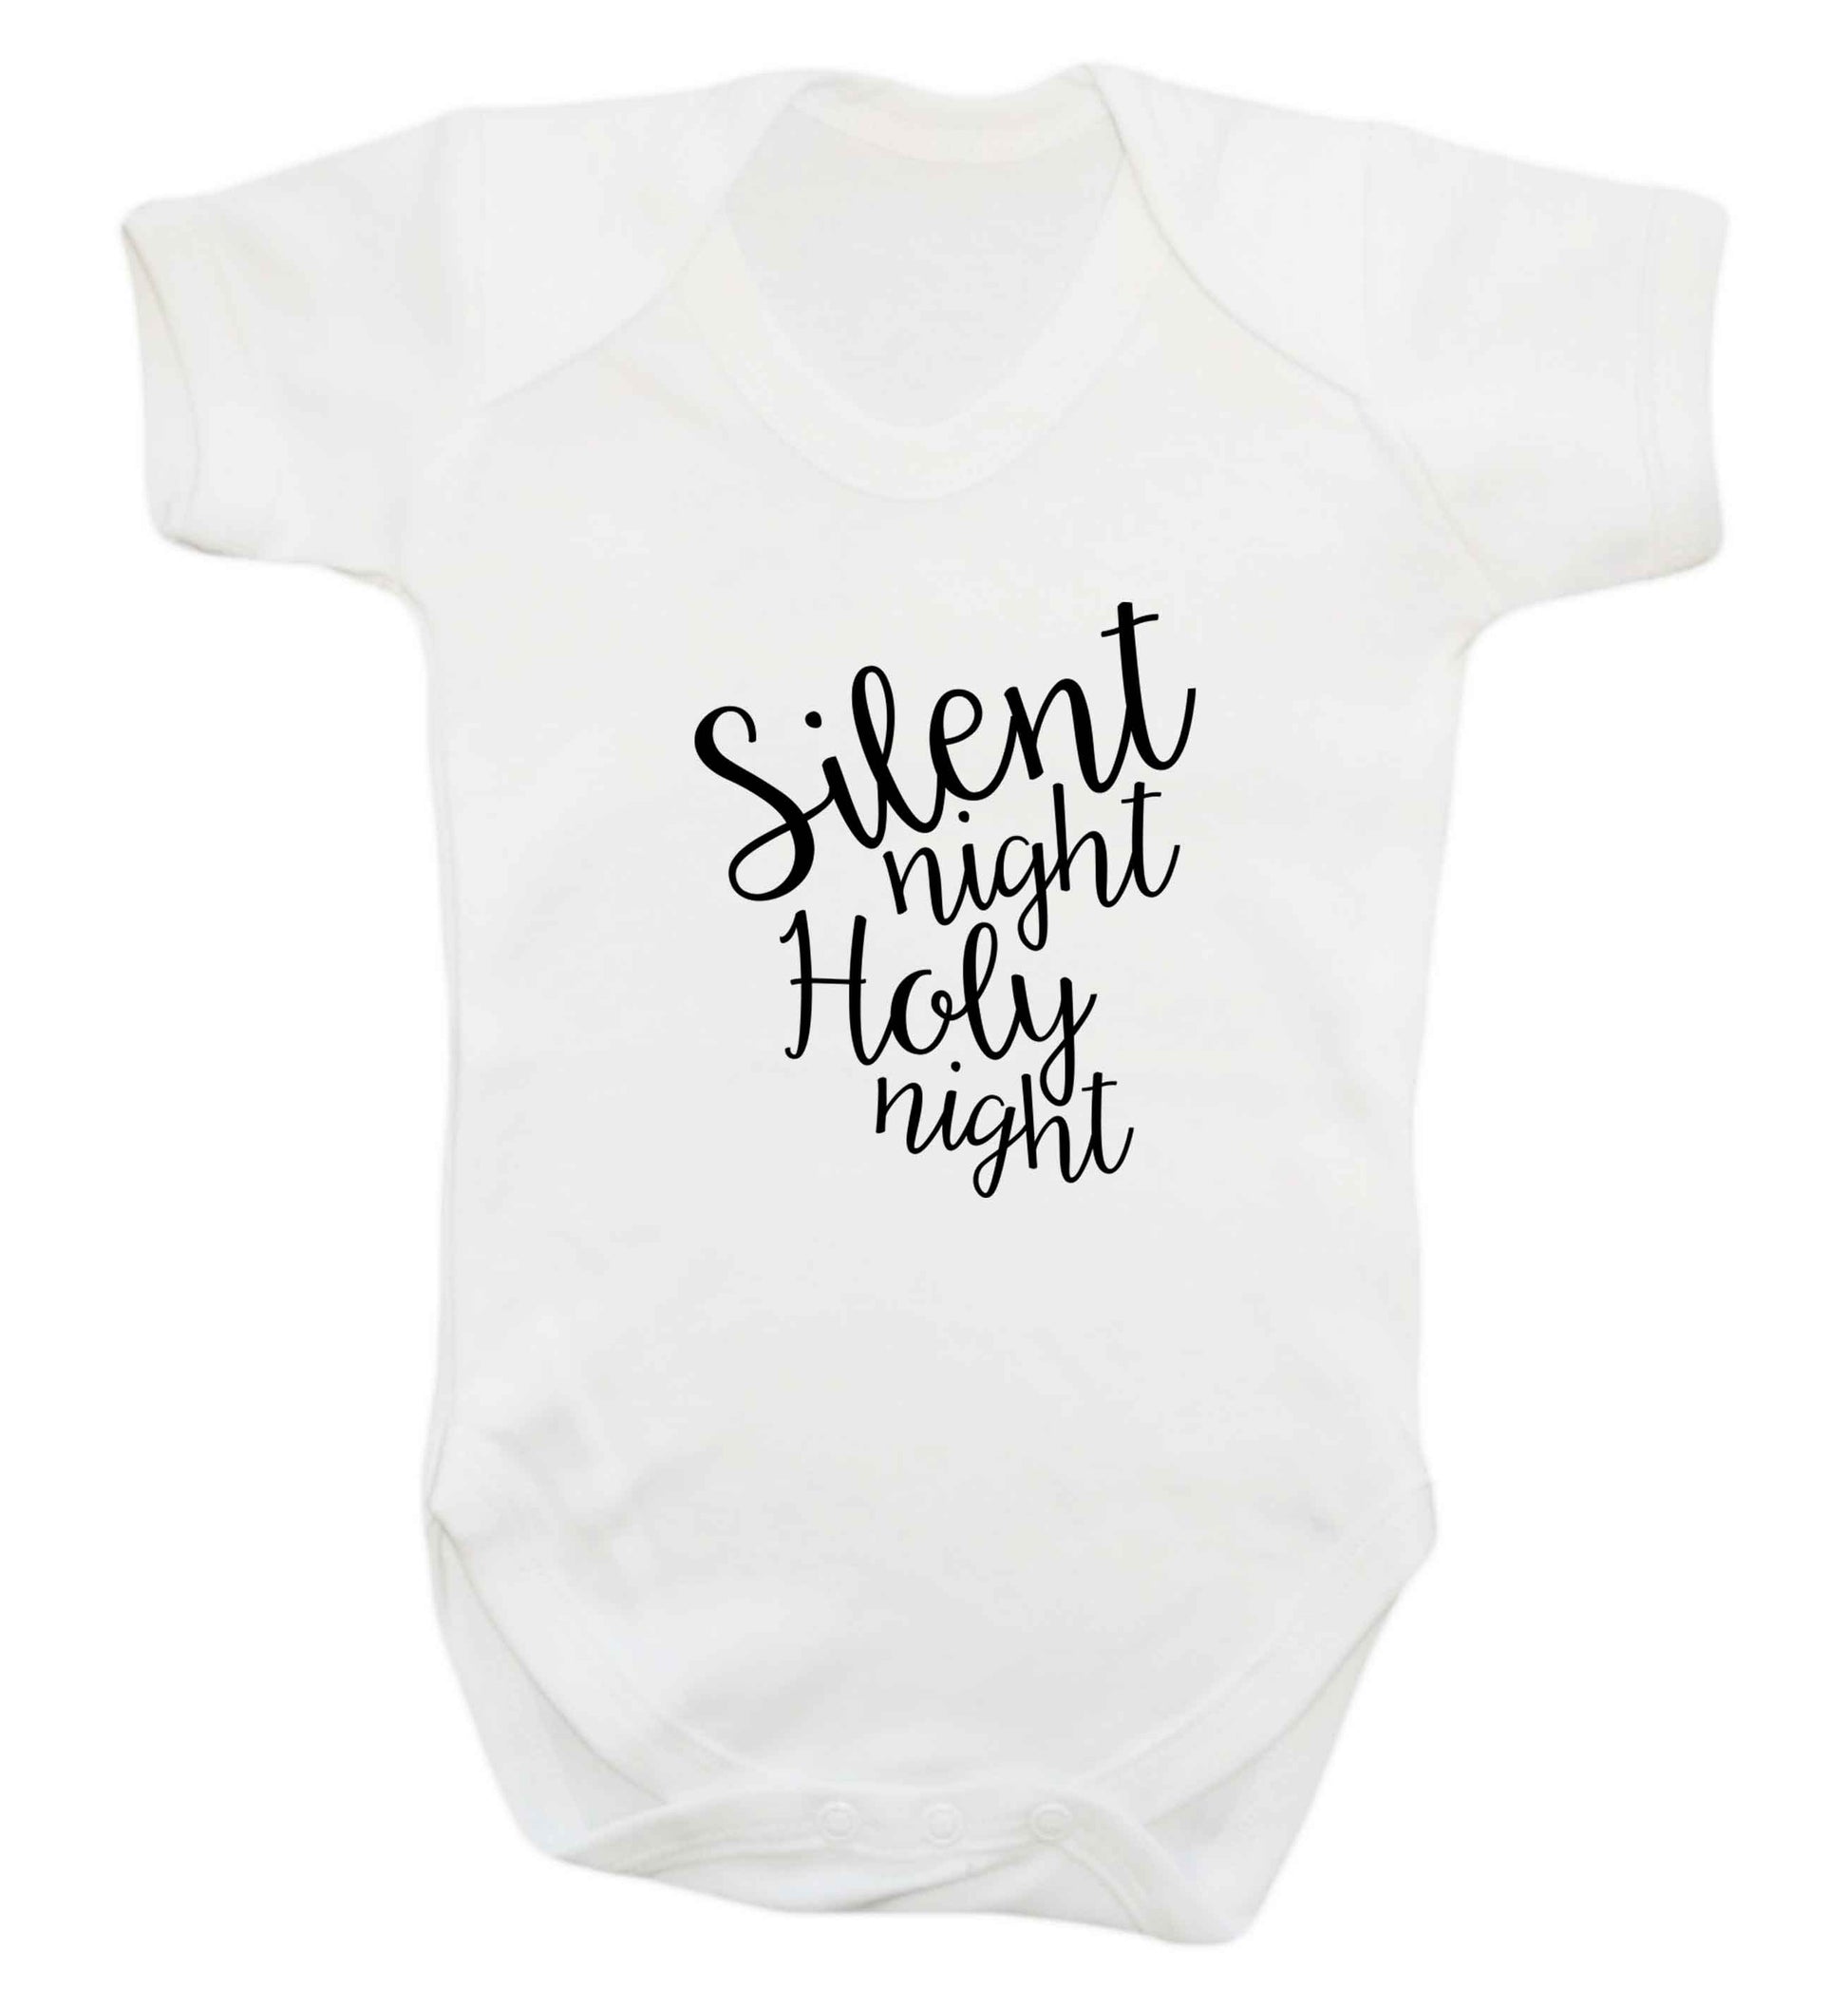 Silent night holy night baby vest white 18-24 months